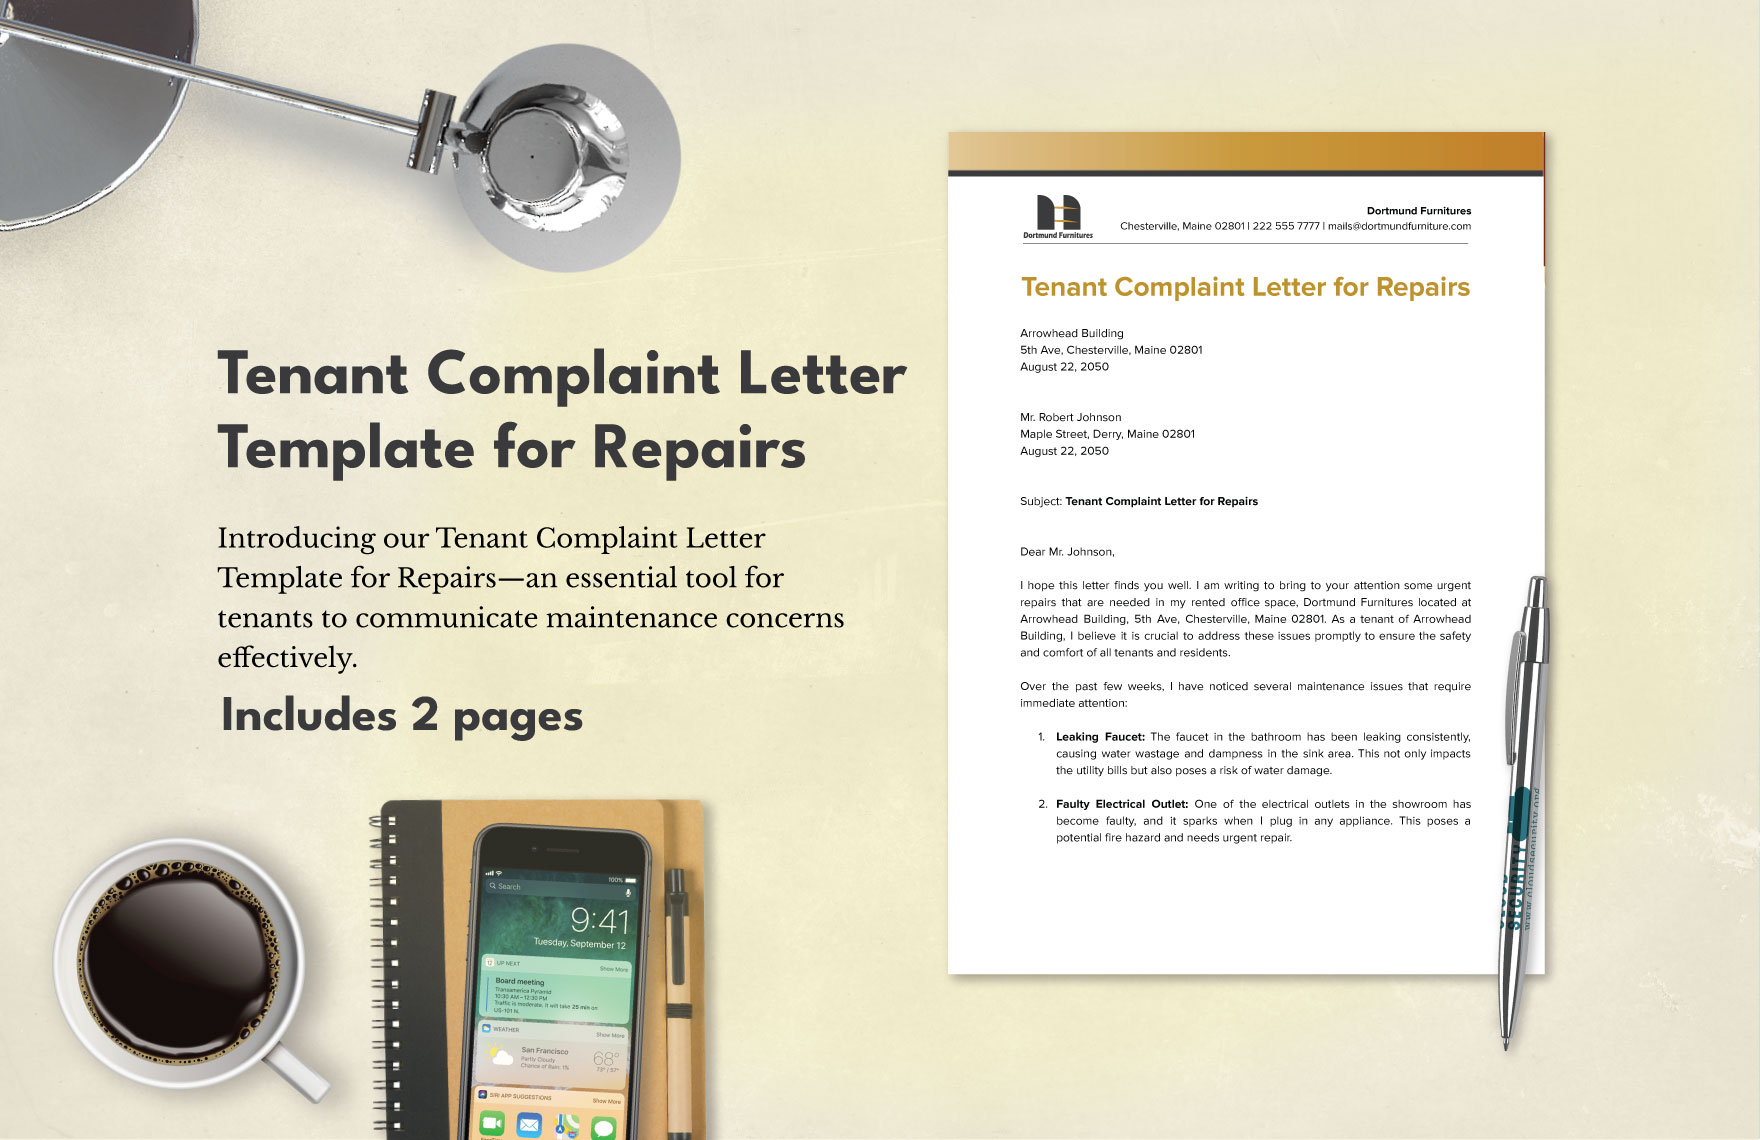 Tenant Complaint Letter Template for Repairs